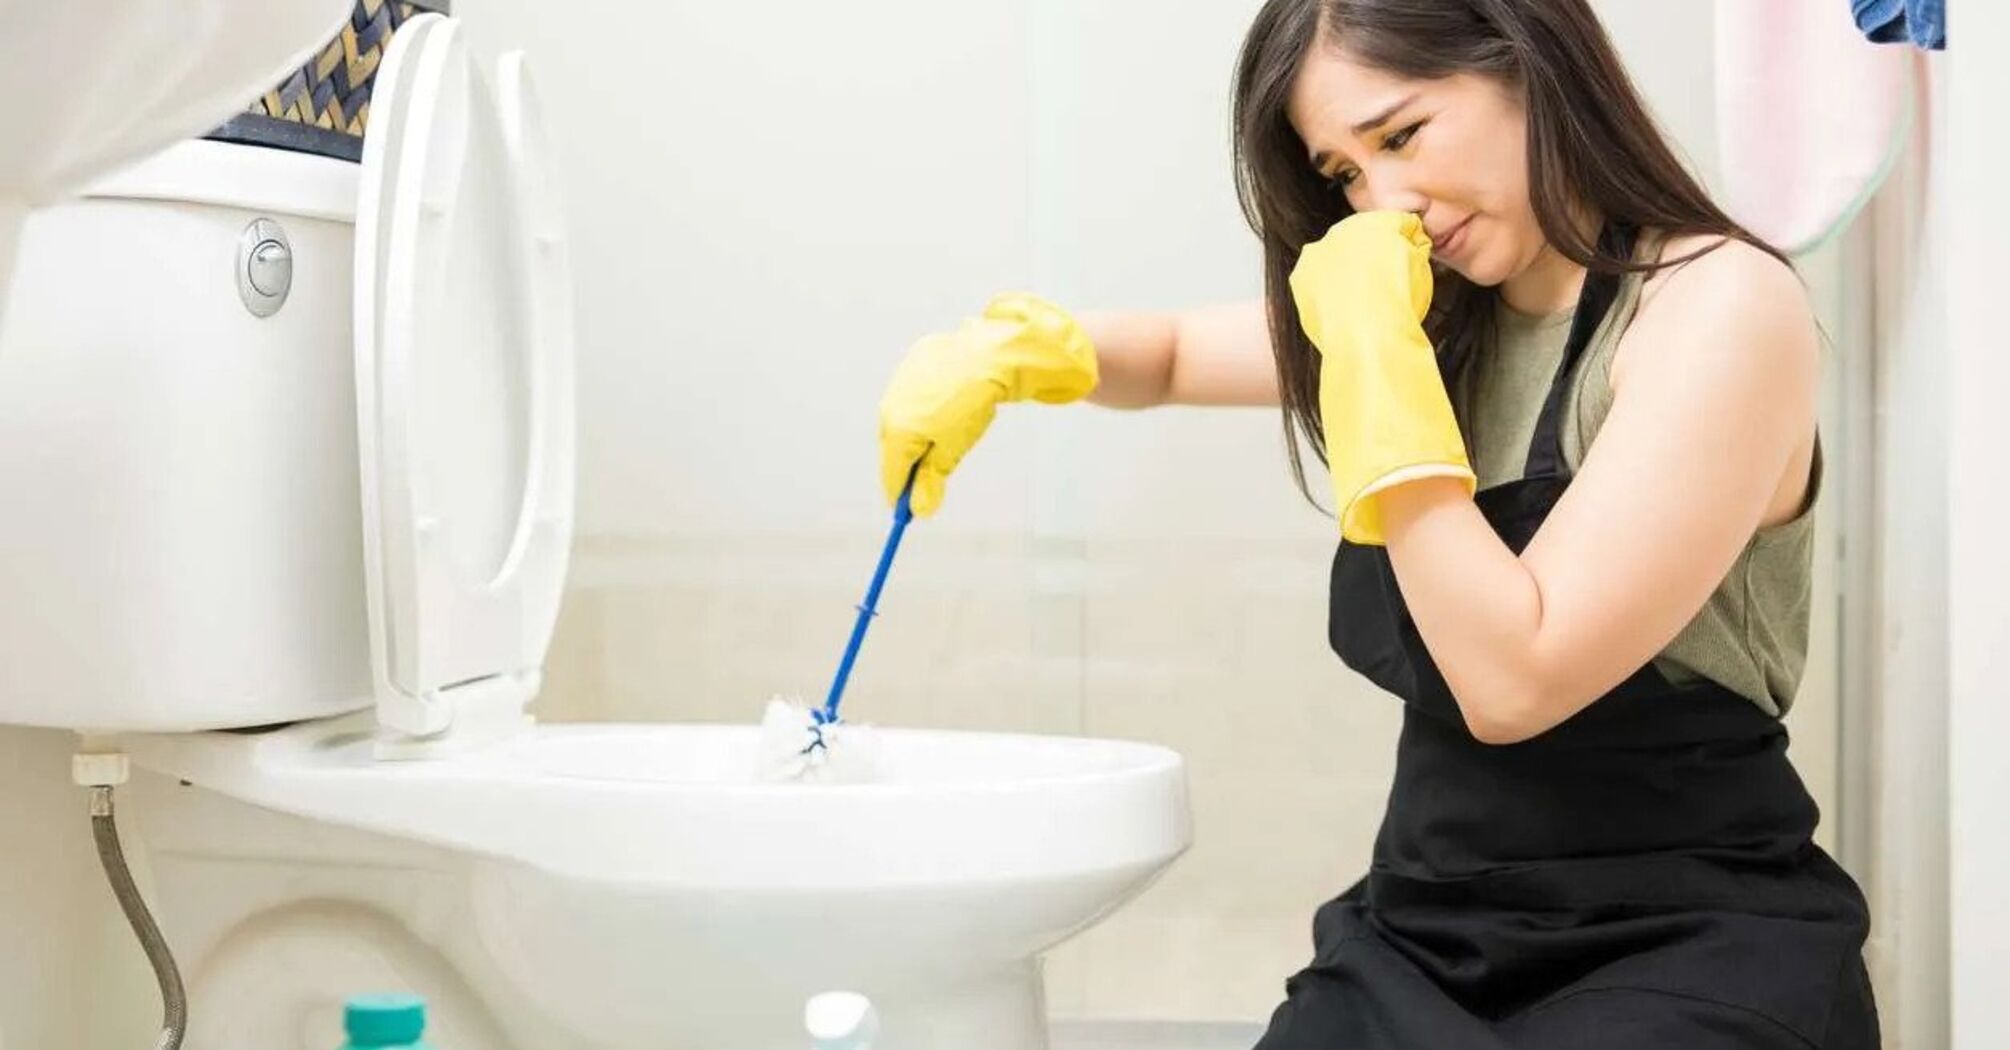 How to freshen up the toilet scent and clean the toilet